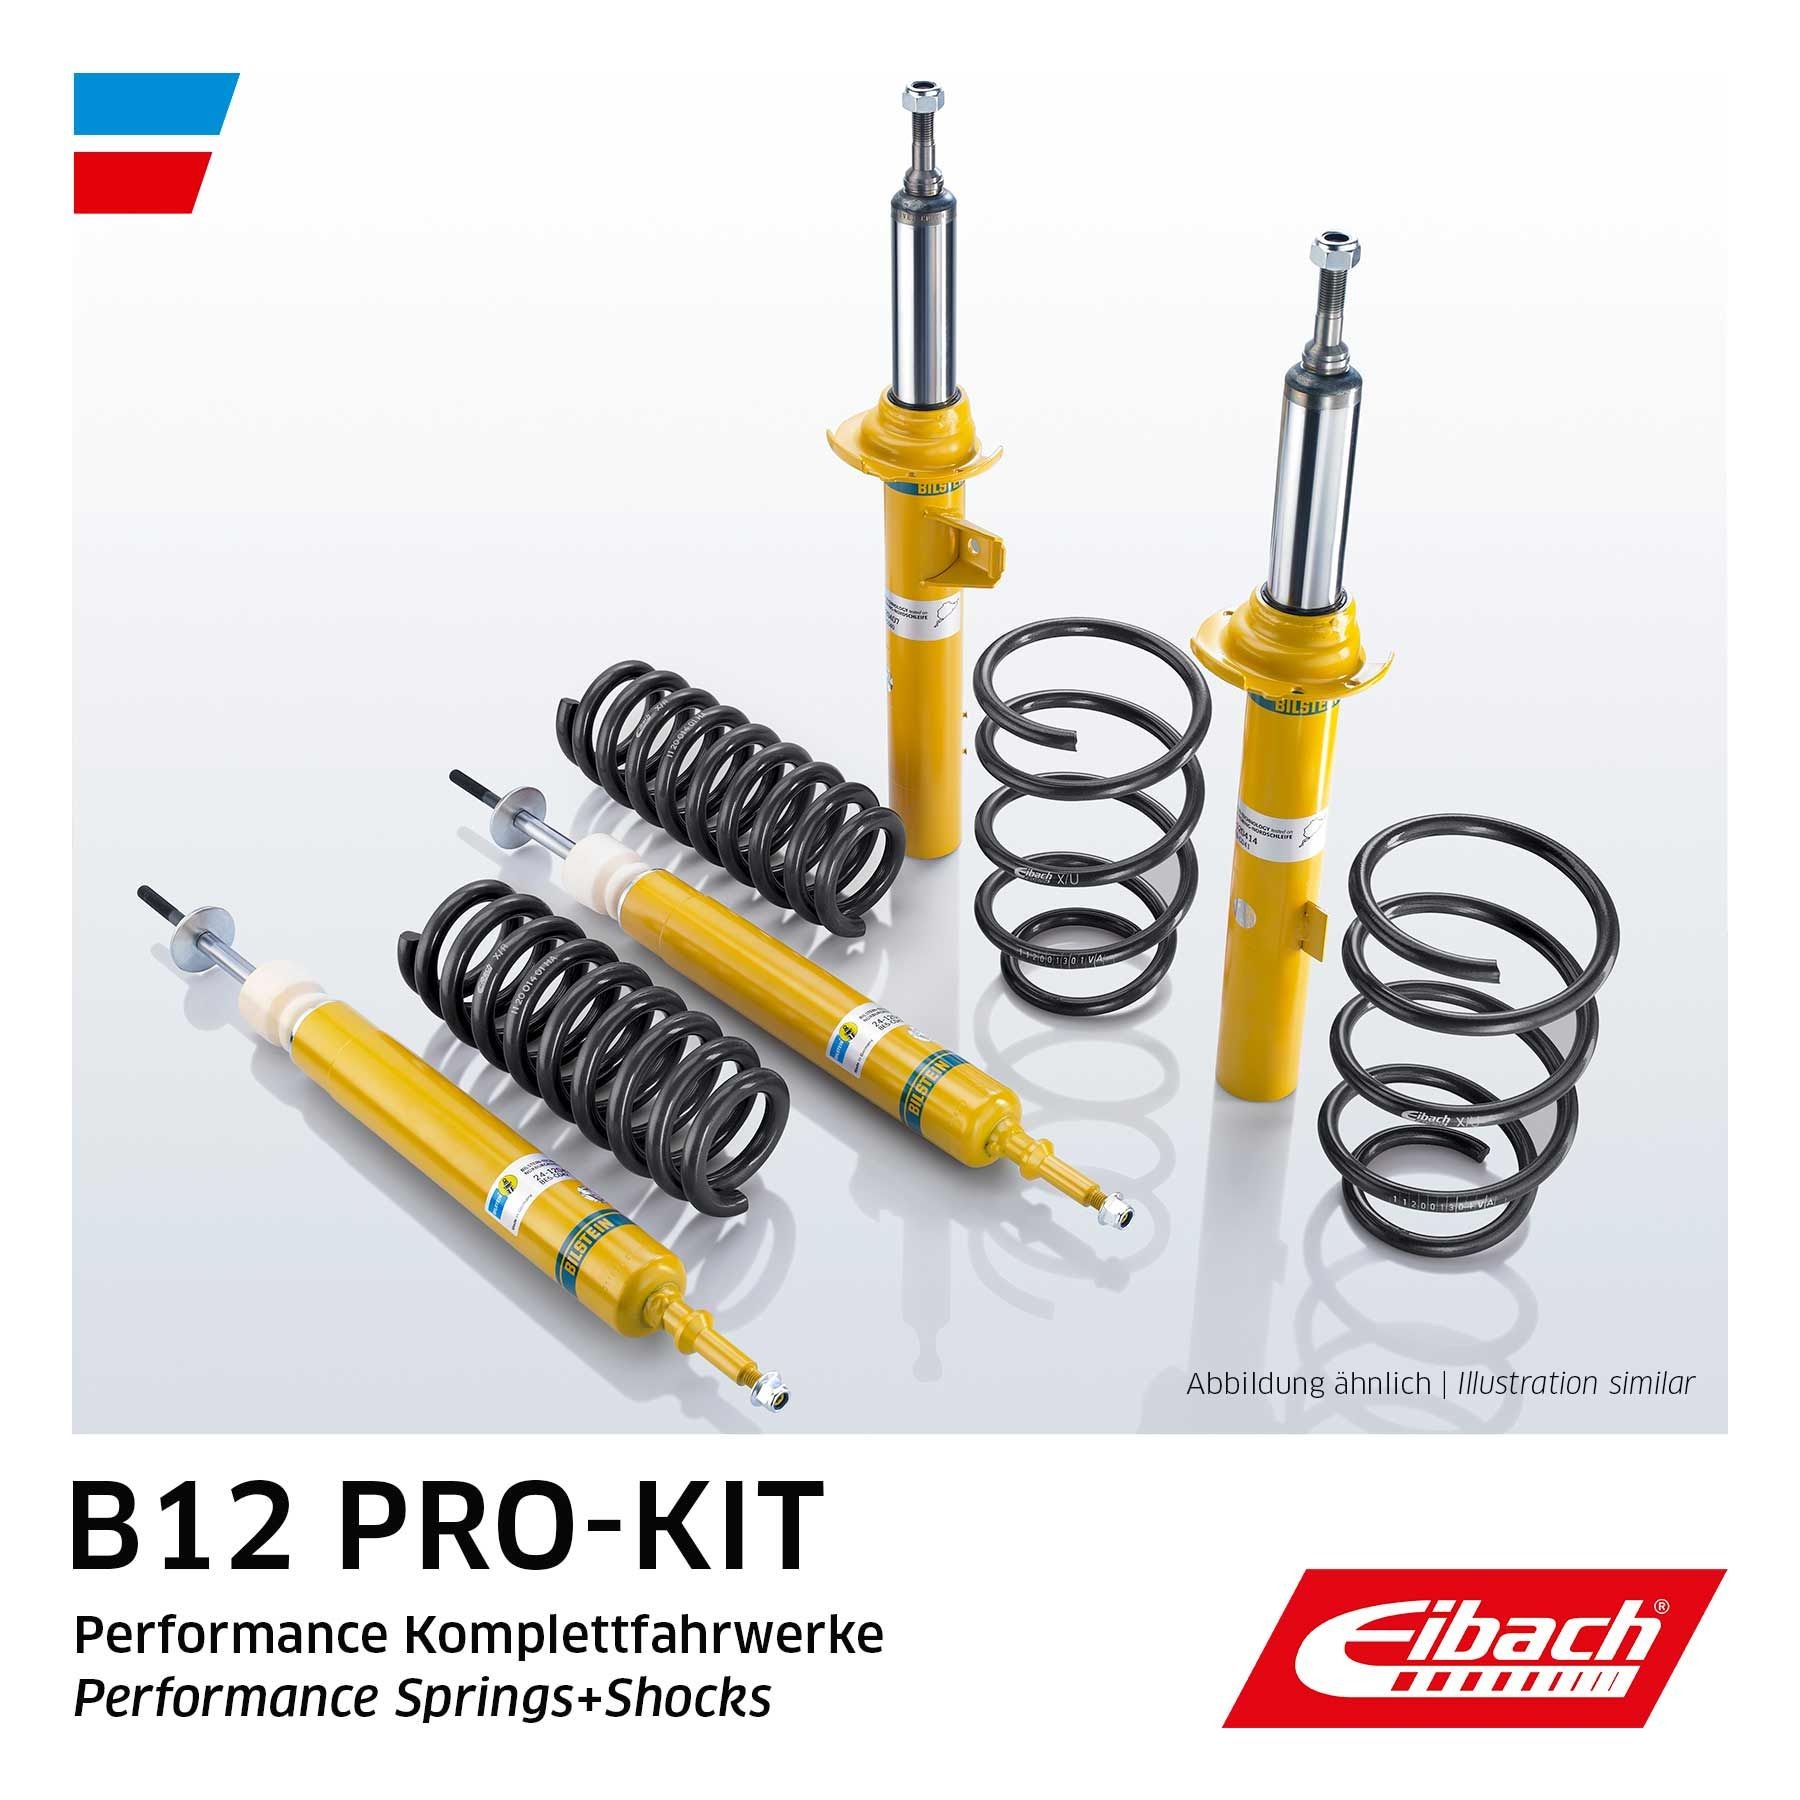 EIBACH E90-22-004-01-20 CITROËN Suspension kit, coil springs / shock absorbers in original quality